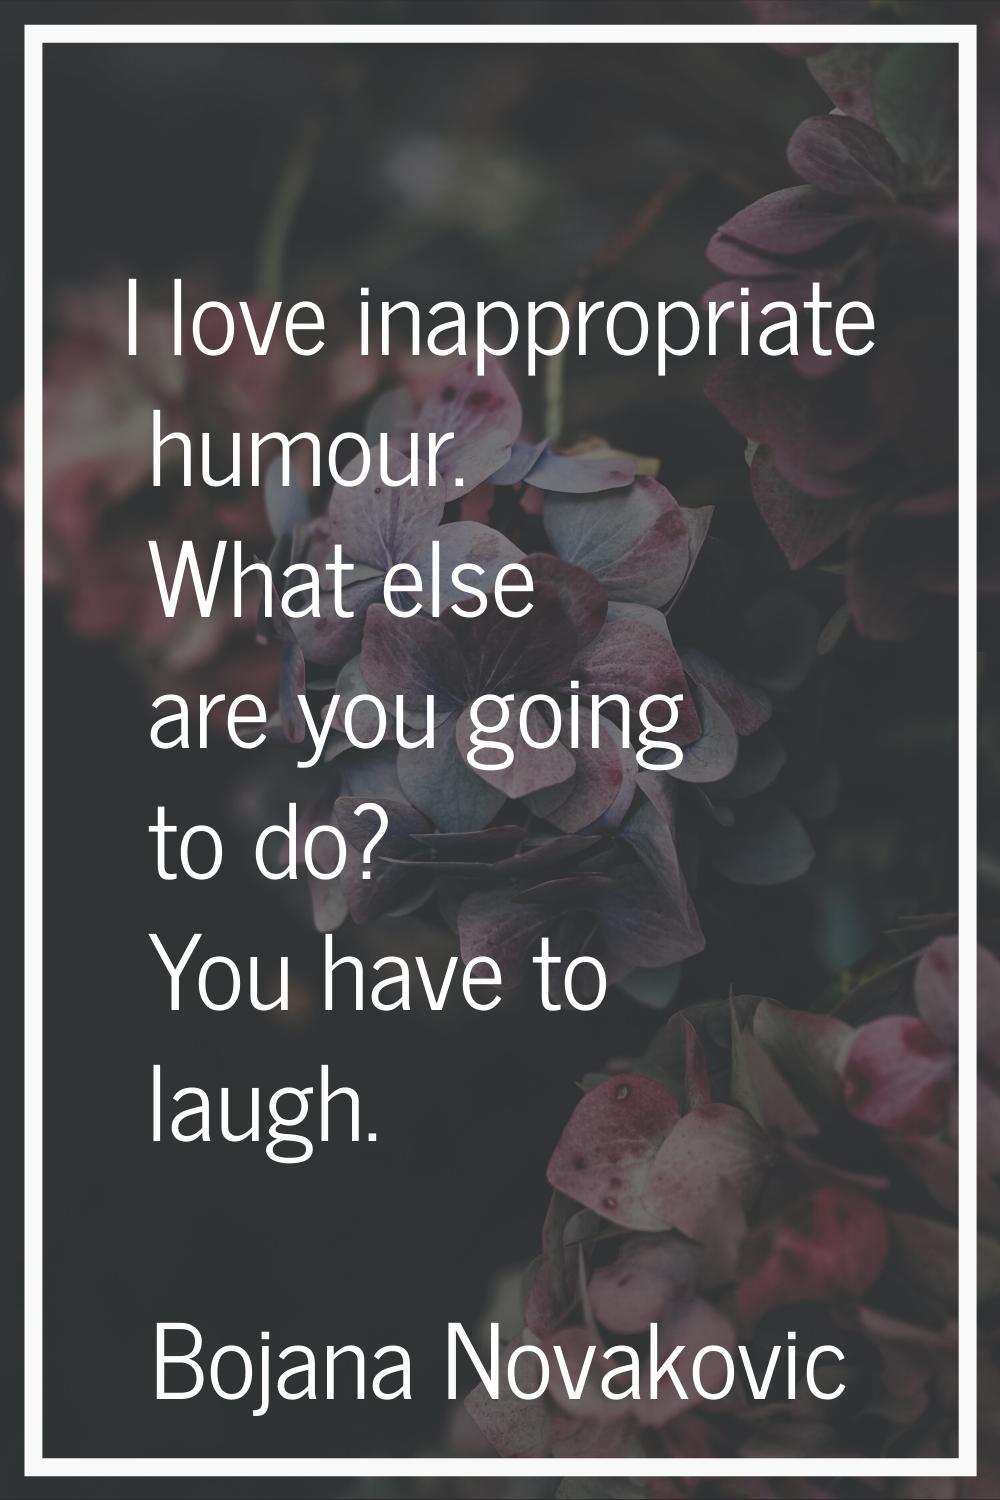 I love inappropriate humour. What else are you going to do? You have to laugh.